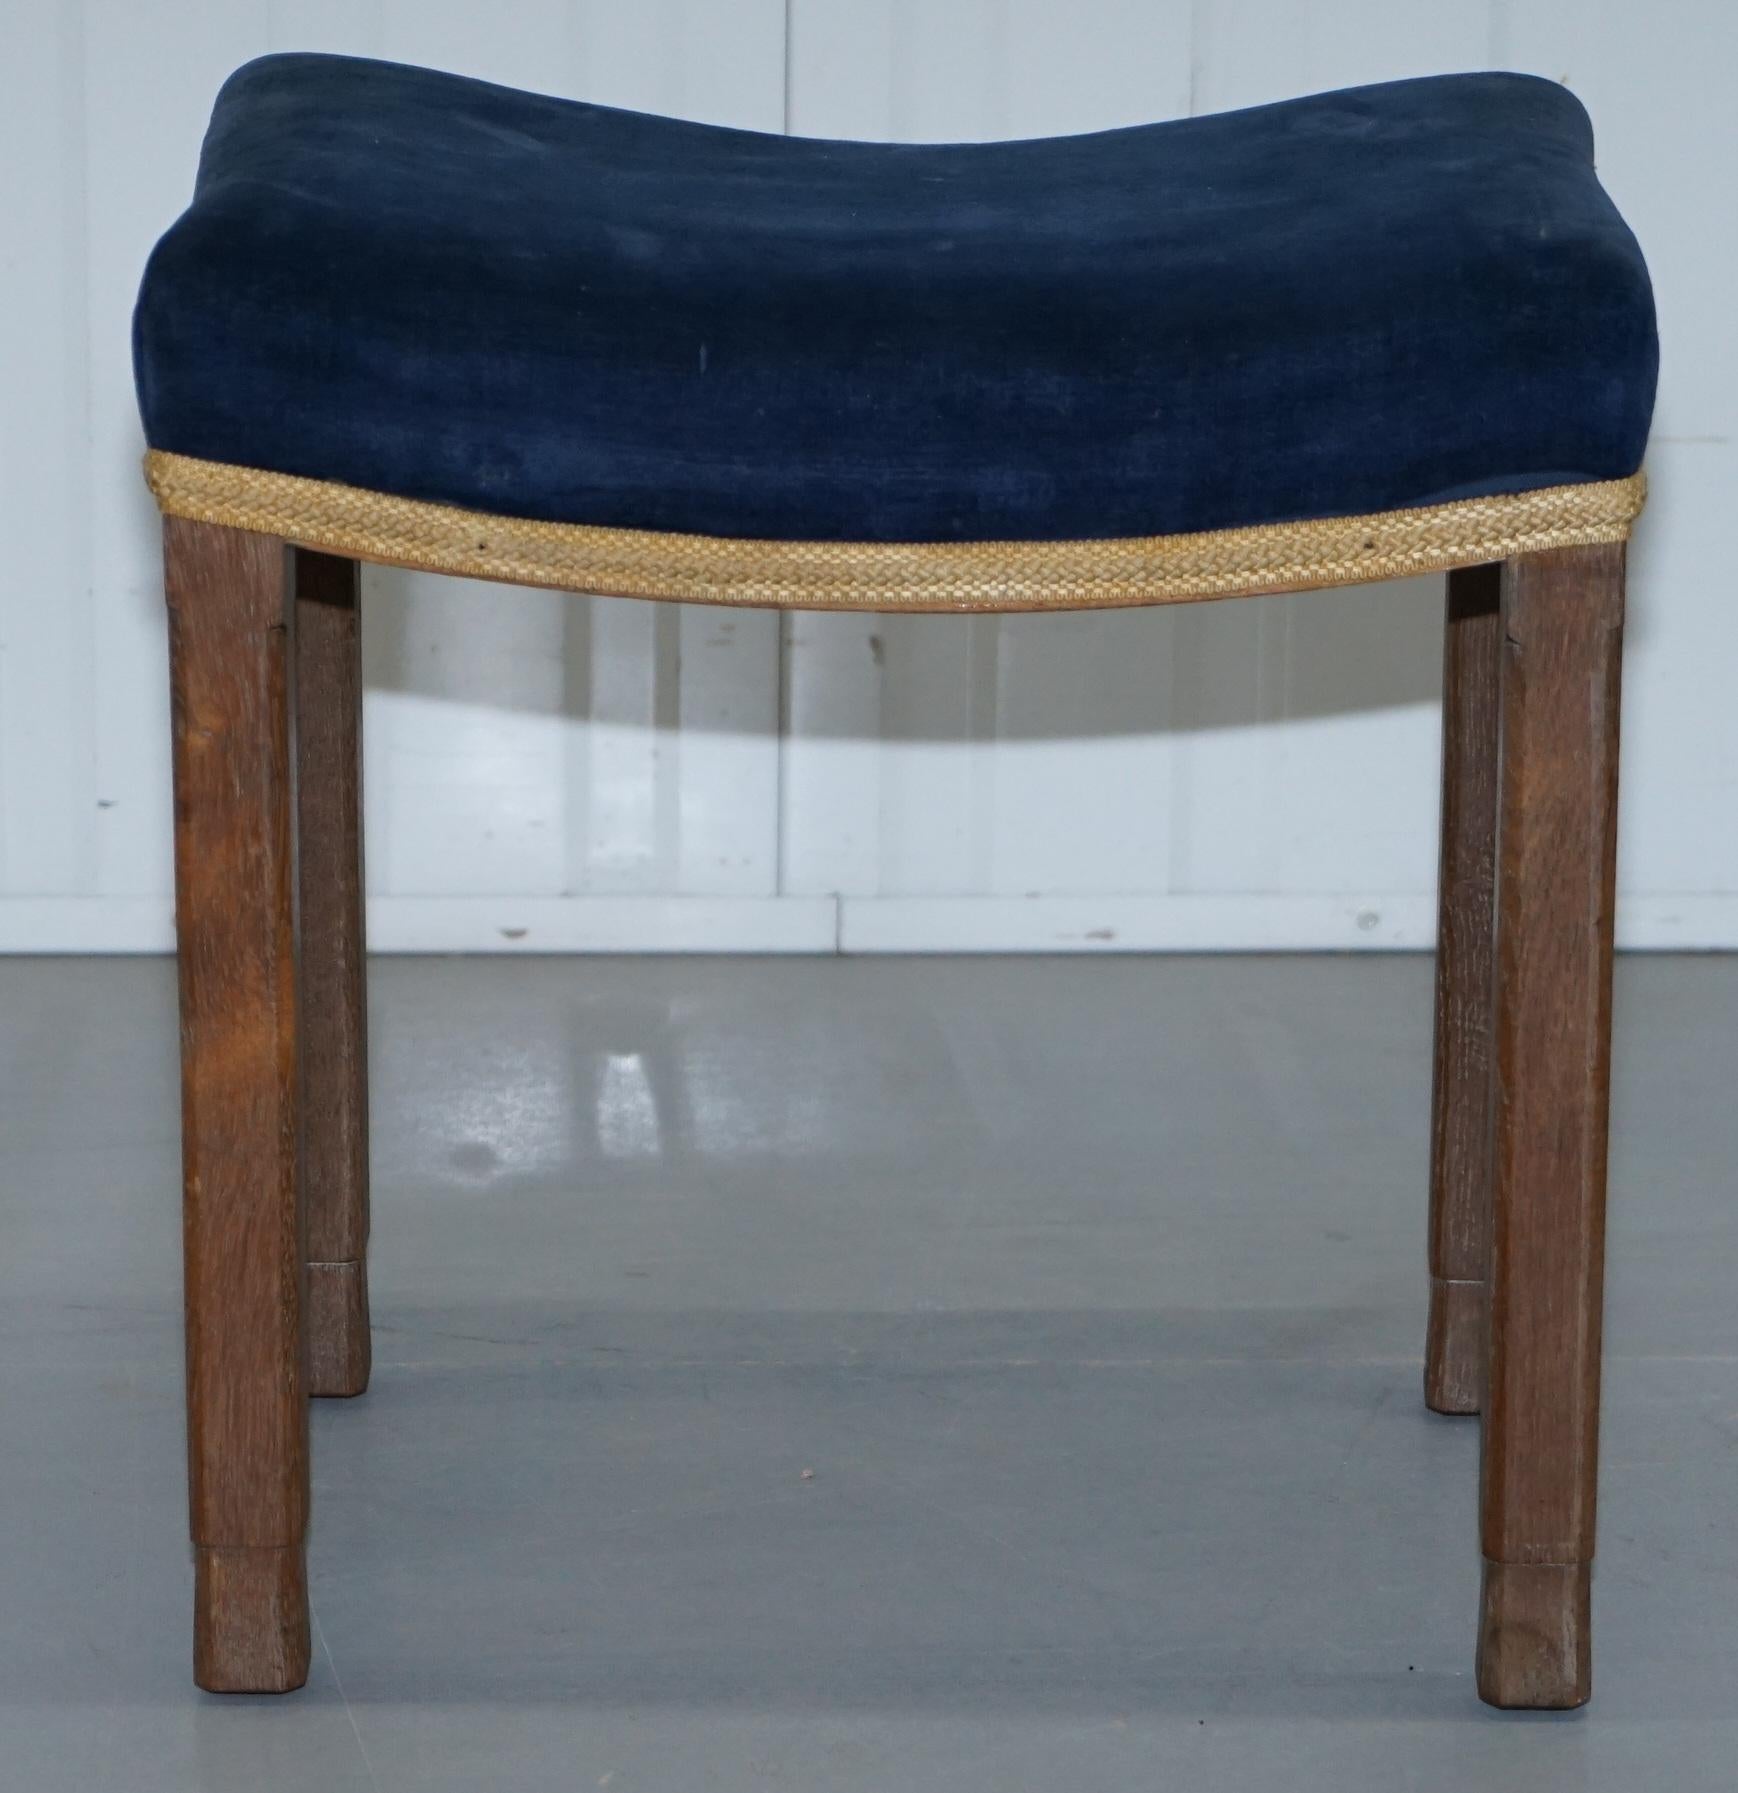 Hand-Crafted Rare Original King George vi Coronation Stool 1937 Limed Oak by Waring & Gillow